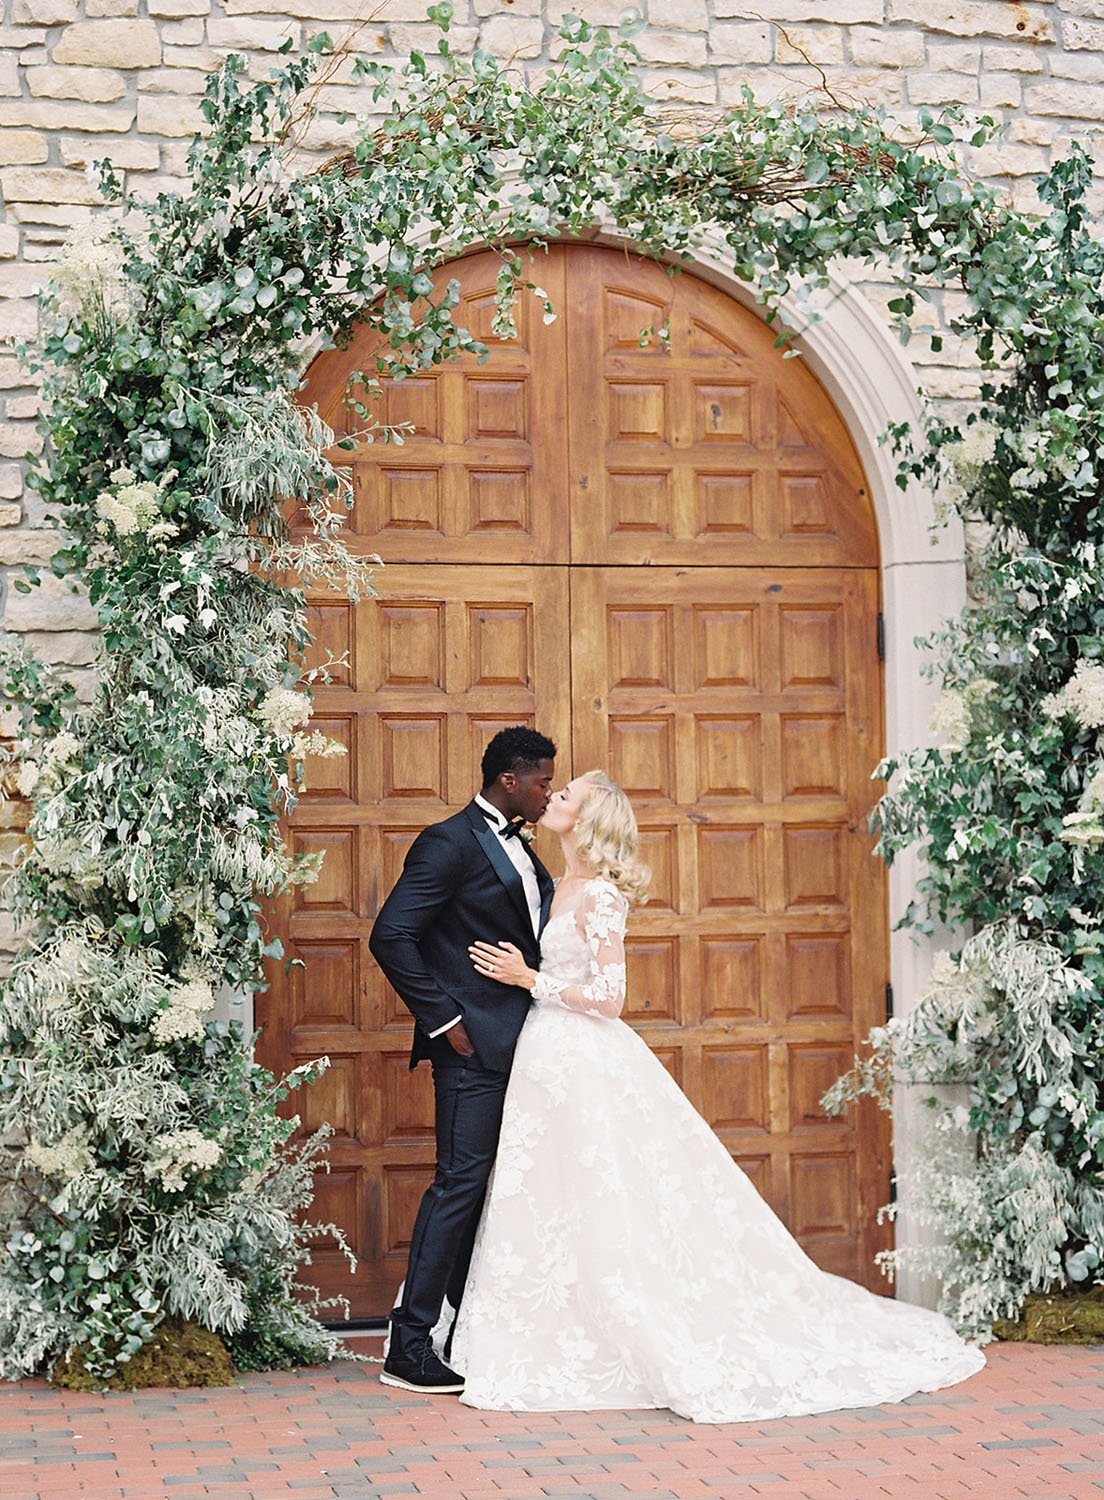  A bride and groom sharing a kiss under a greenery arbor for their spring midwest wedding. The bride is wearing 'Maeve' by Monique Lhuillier. 